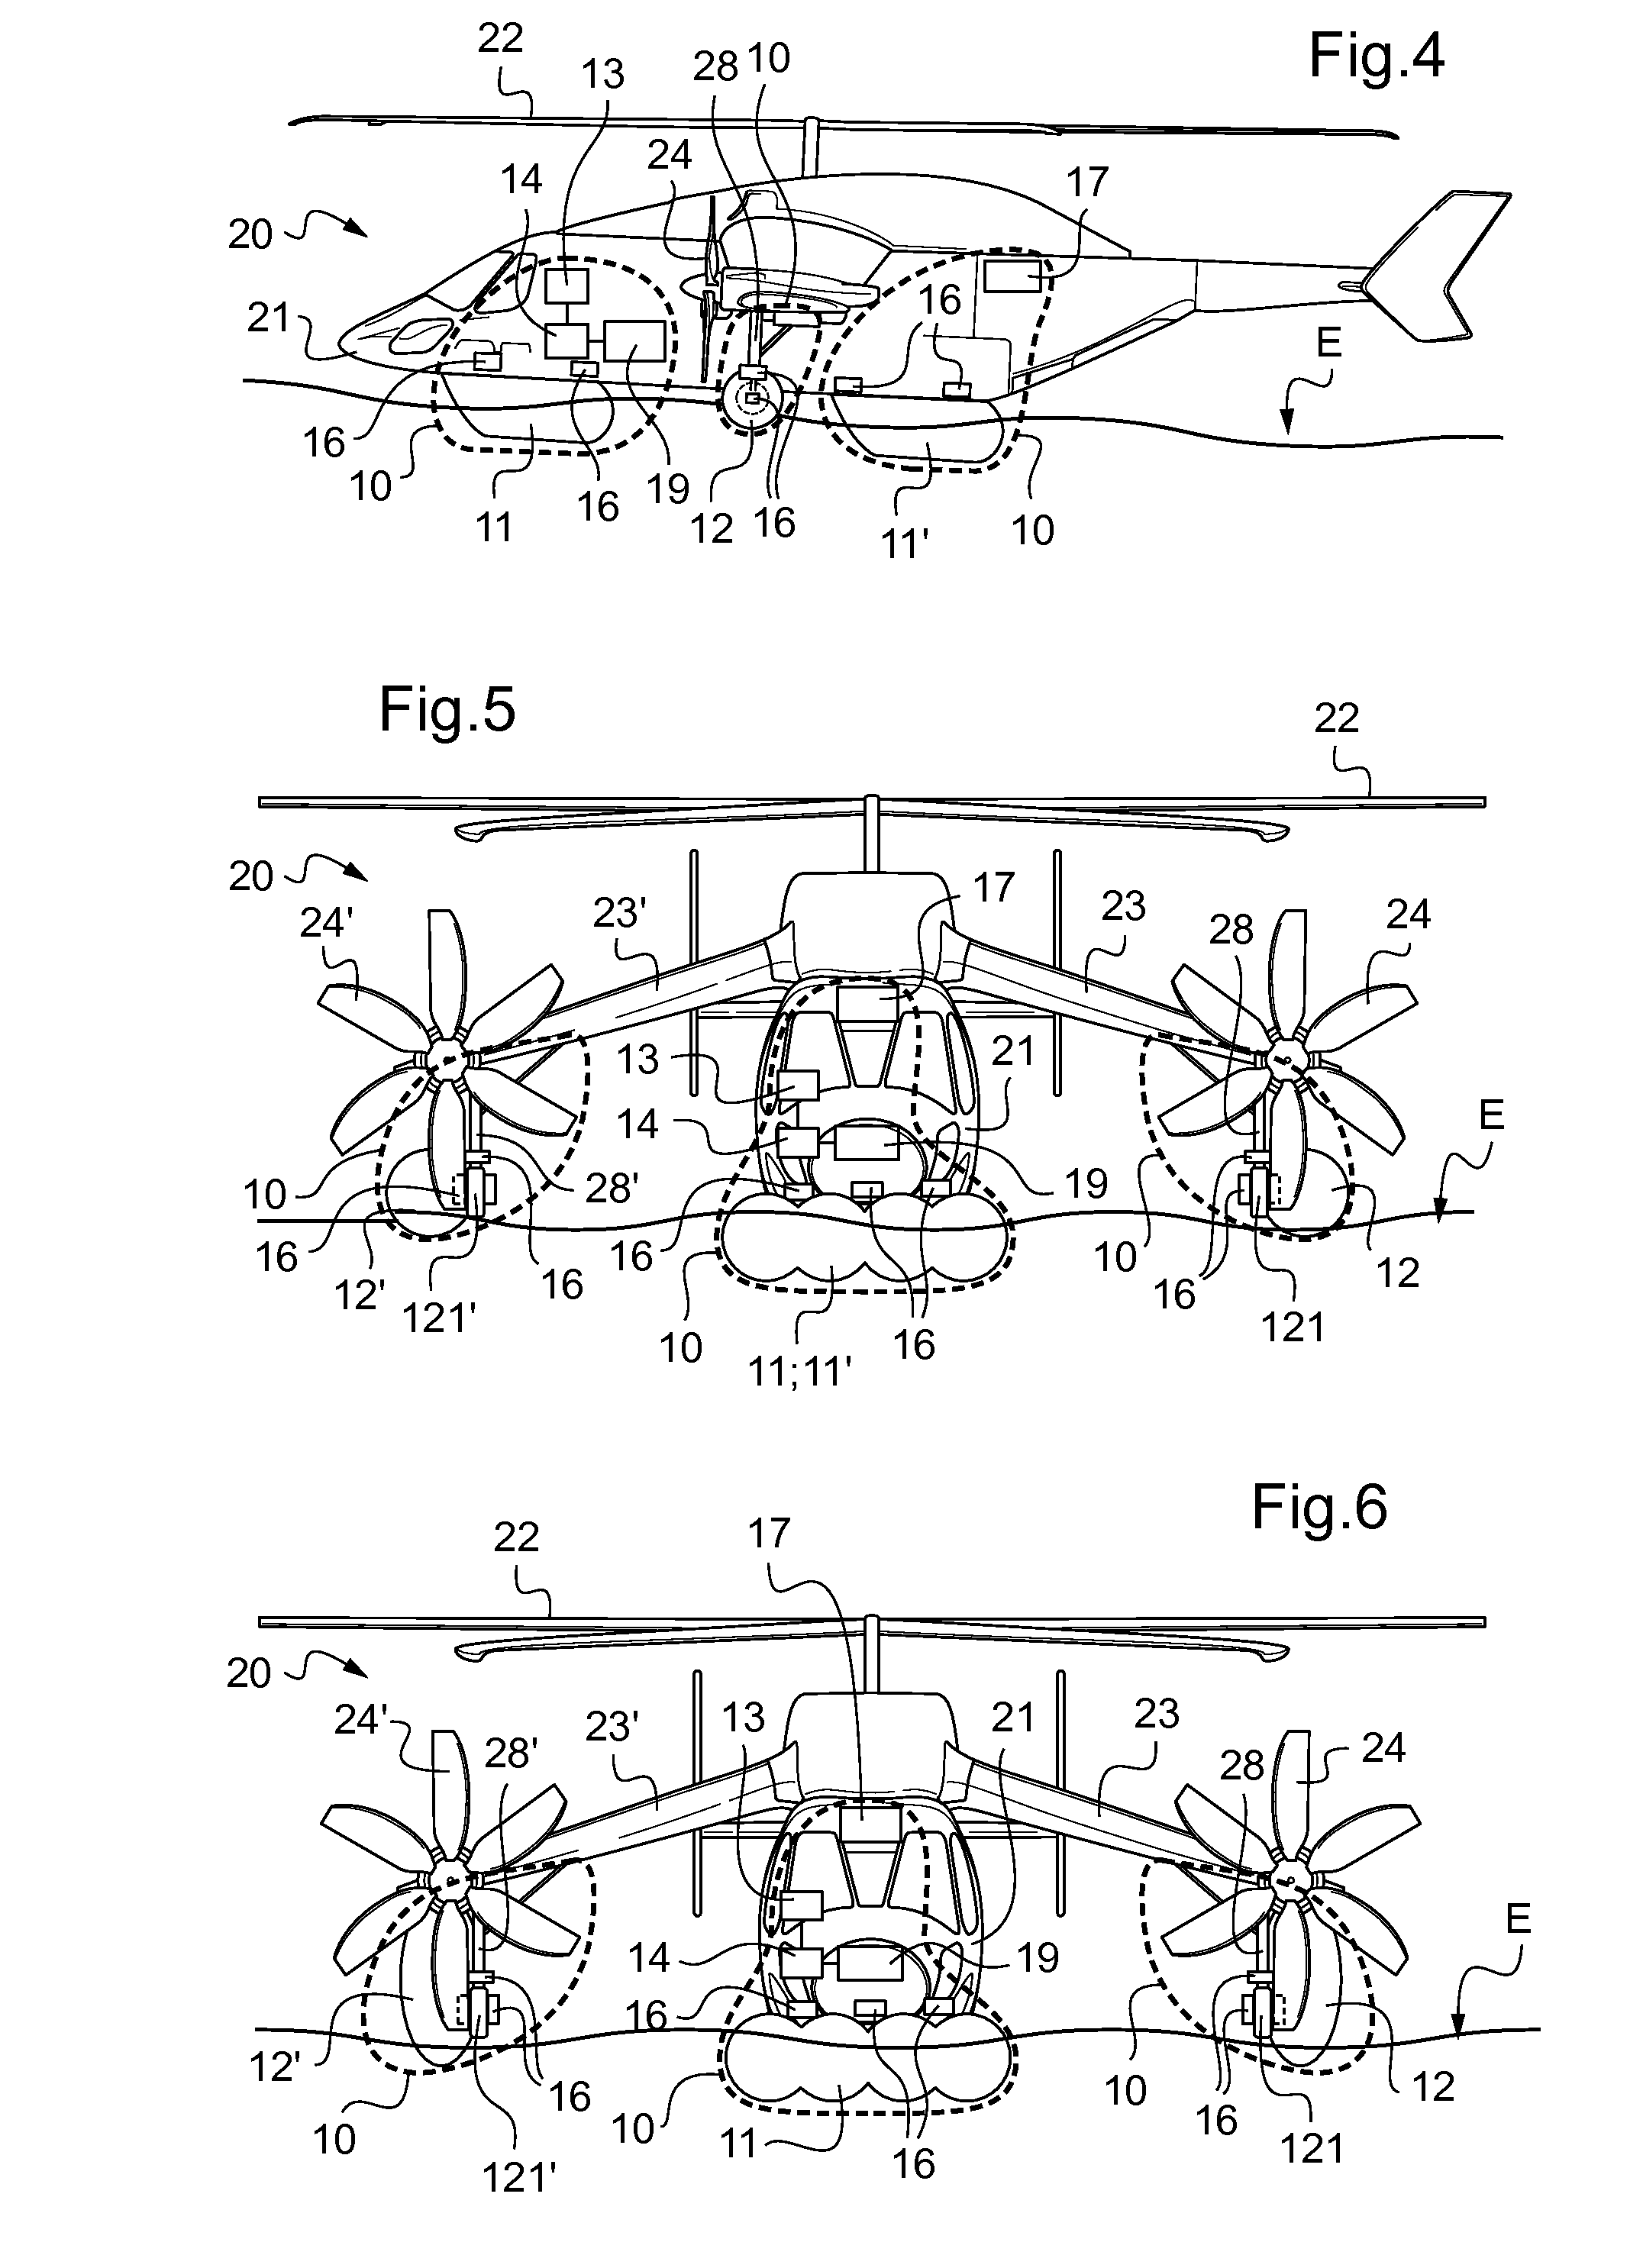 Method of automatically triggering an emergency buoyancy system for a hybrid helicopter